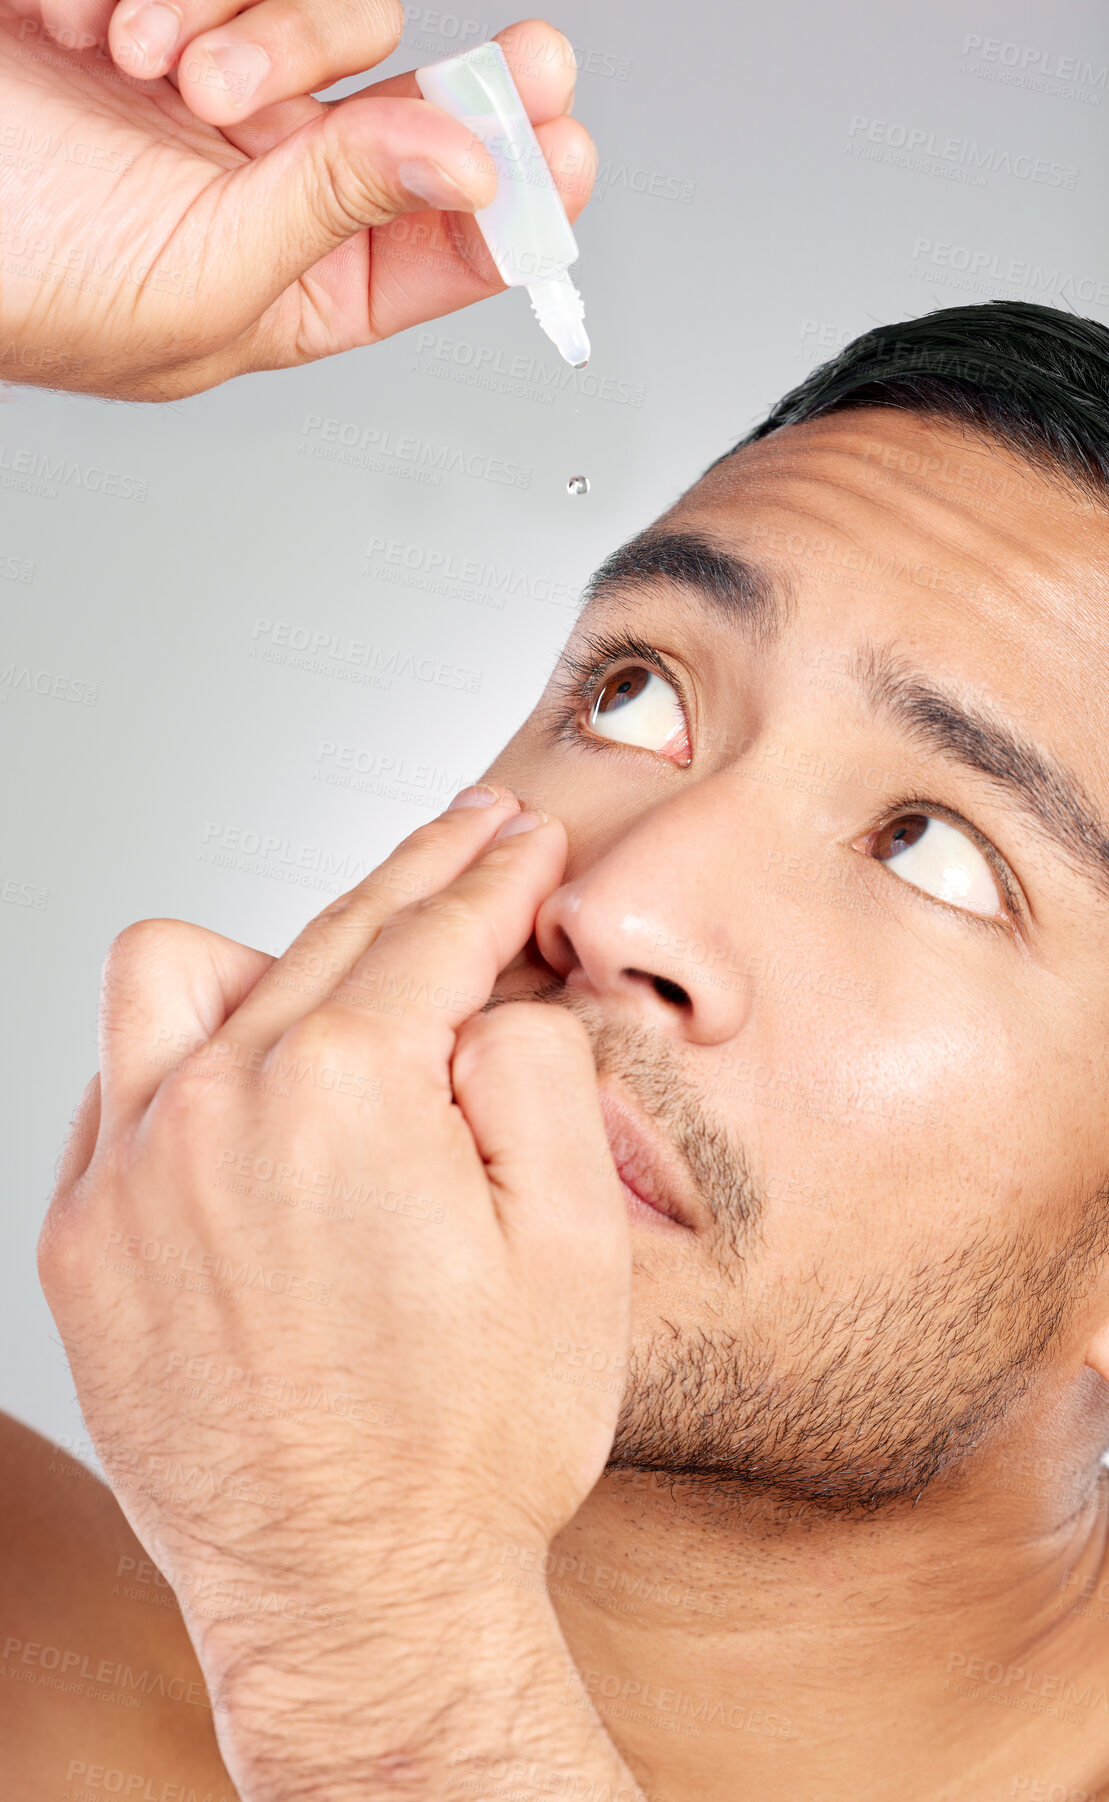 Buy stock photo Studio shot of a handsome young man applying eye drops against a grey background